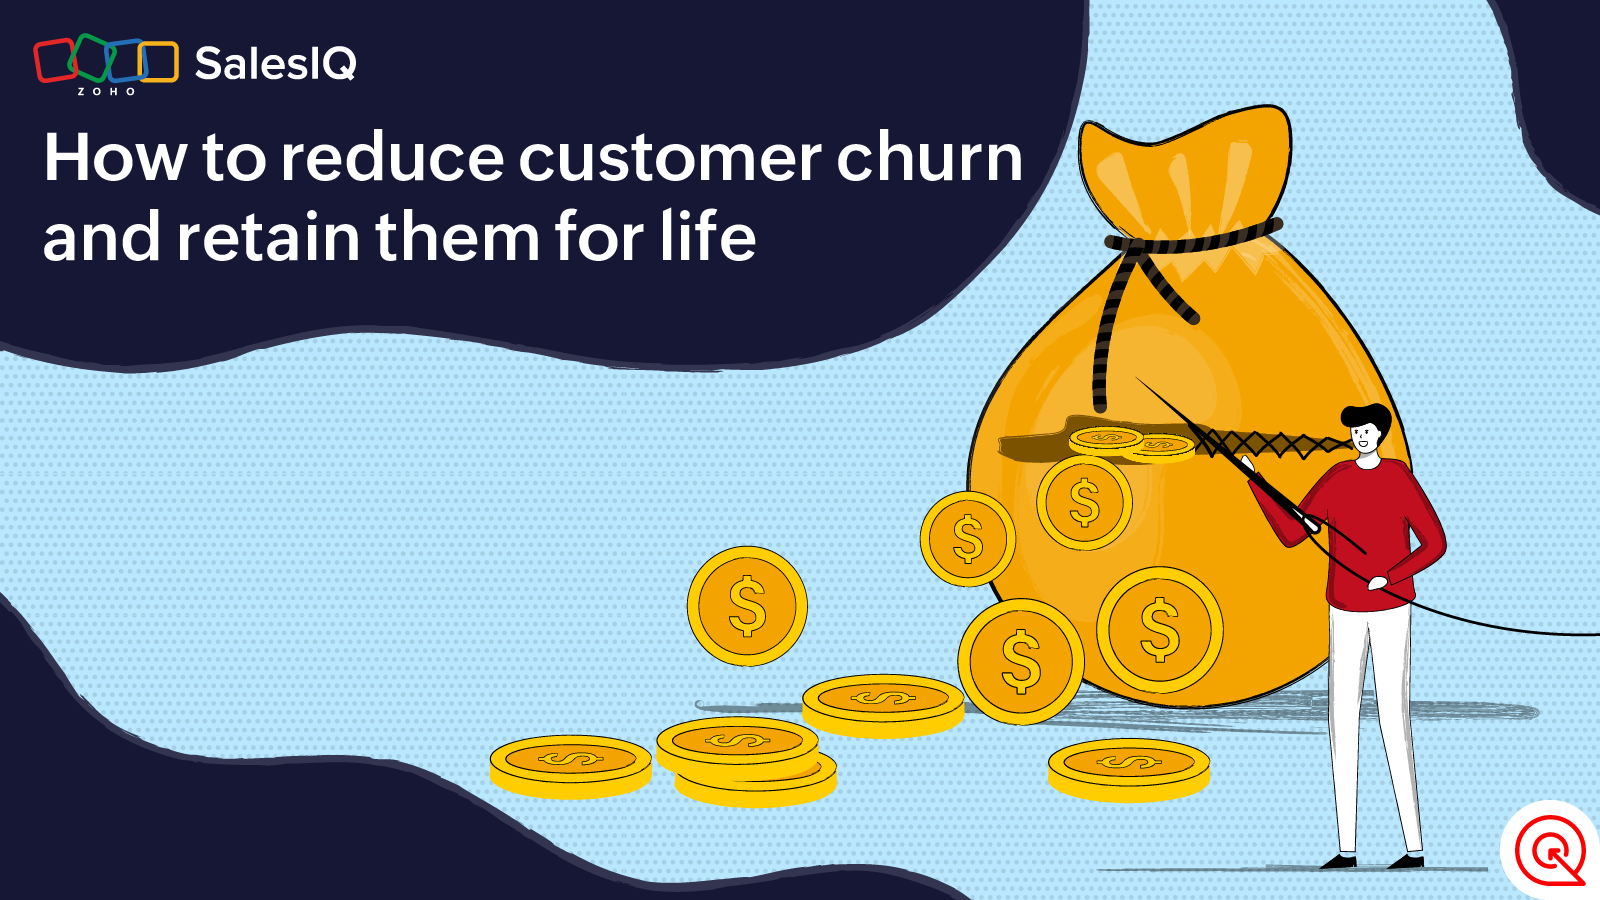 How to reduce customer churn and retain them for life